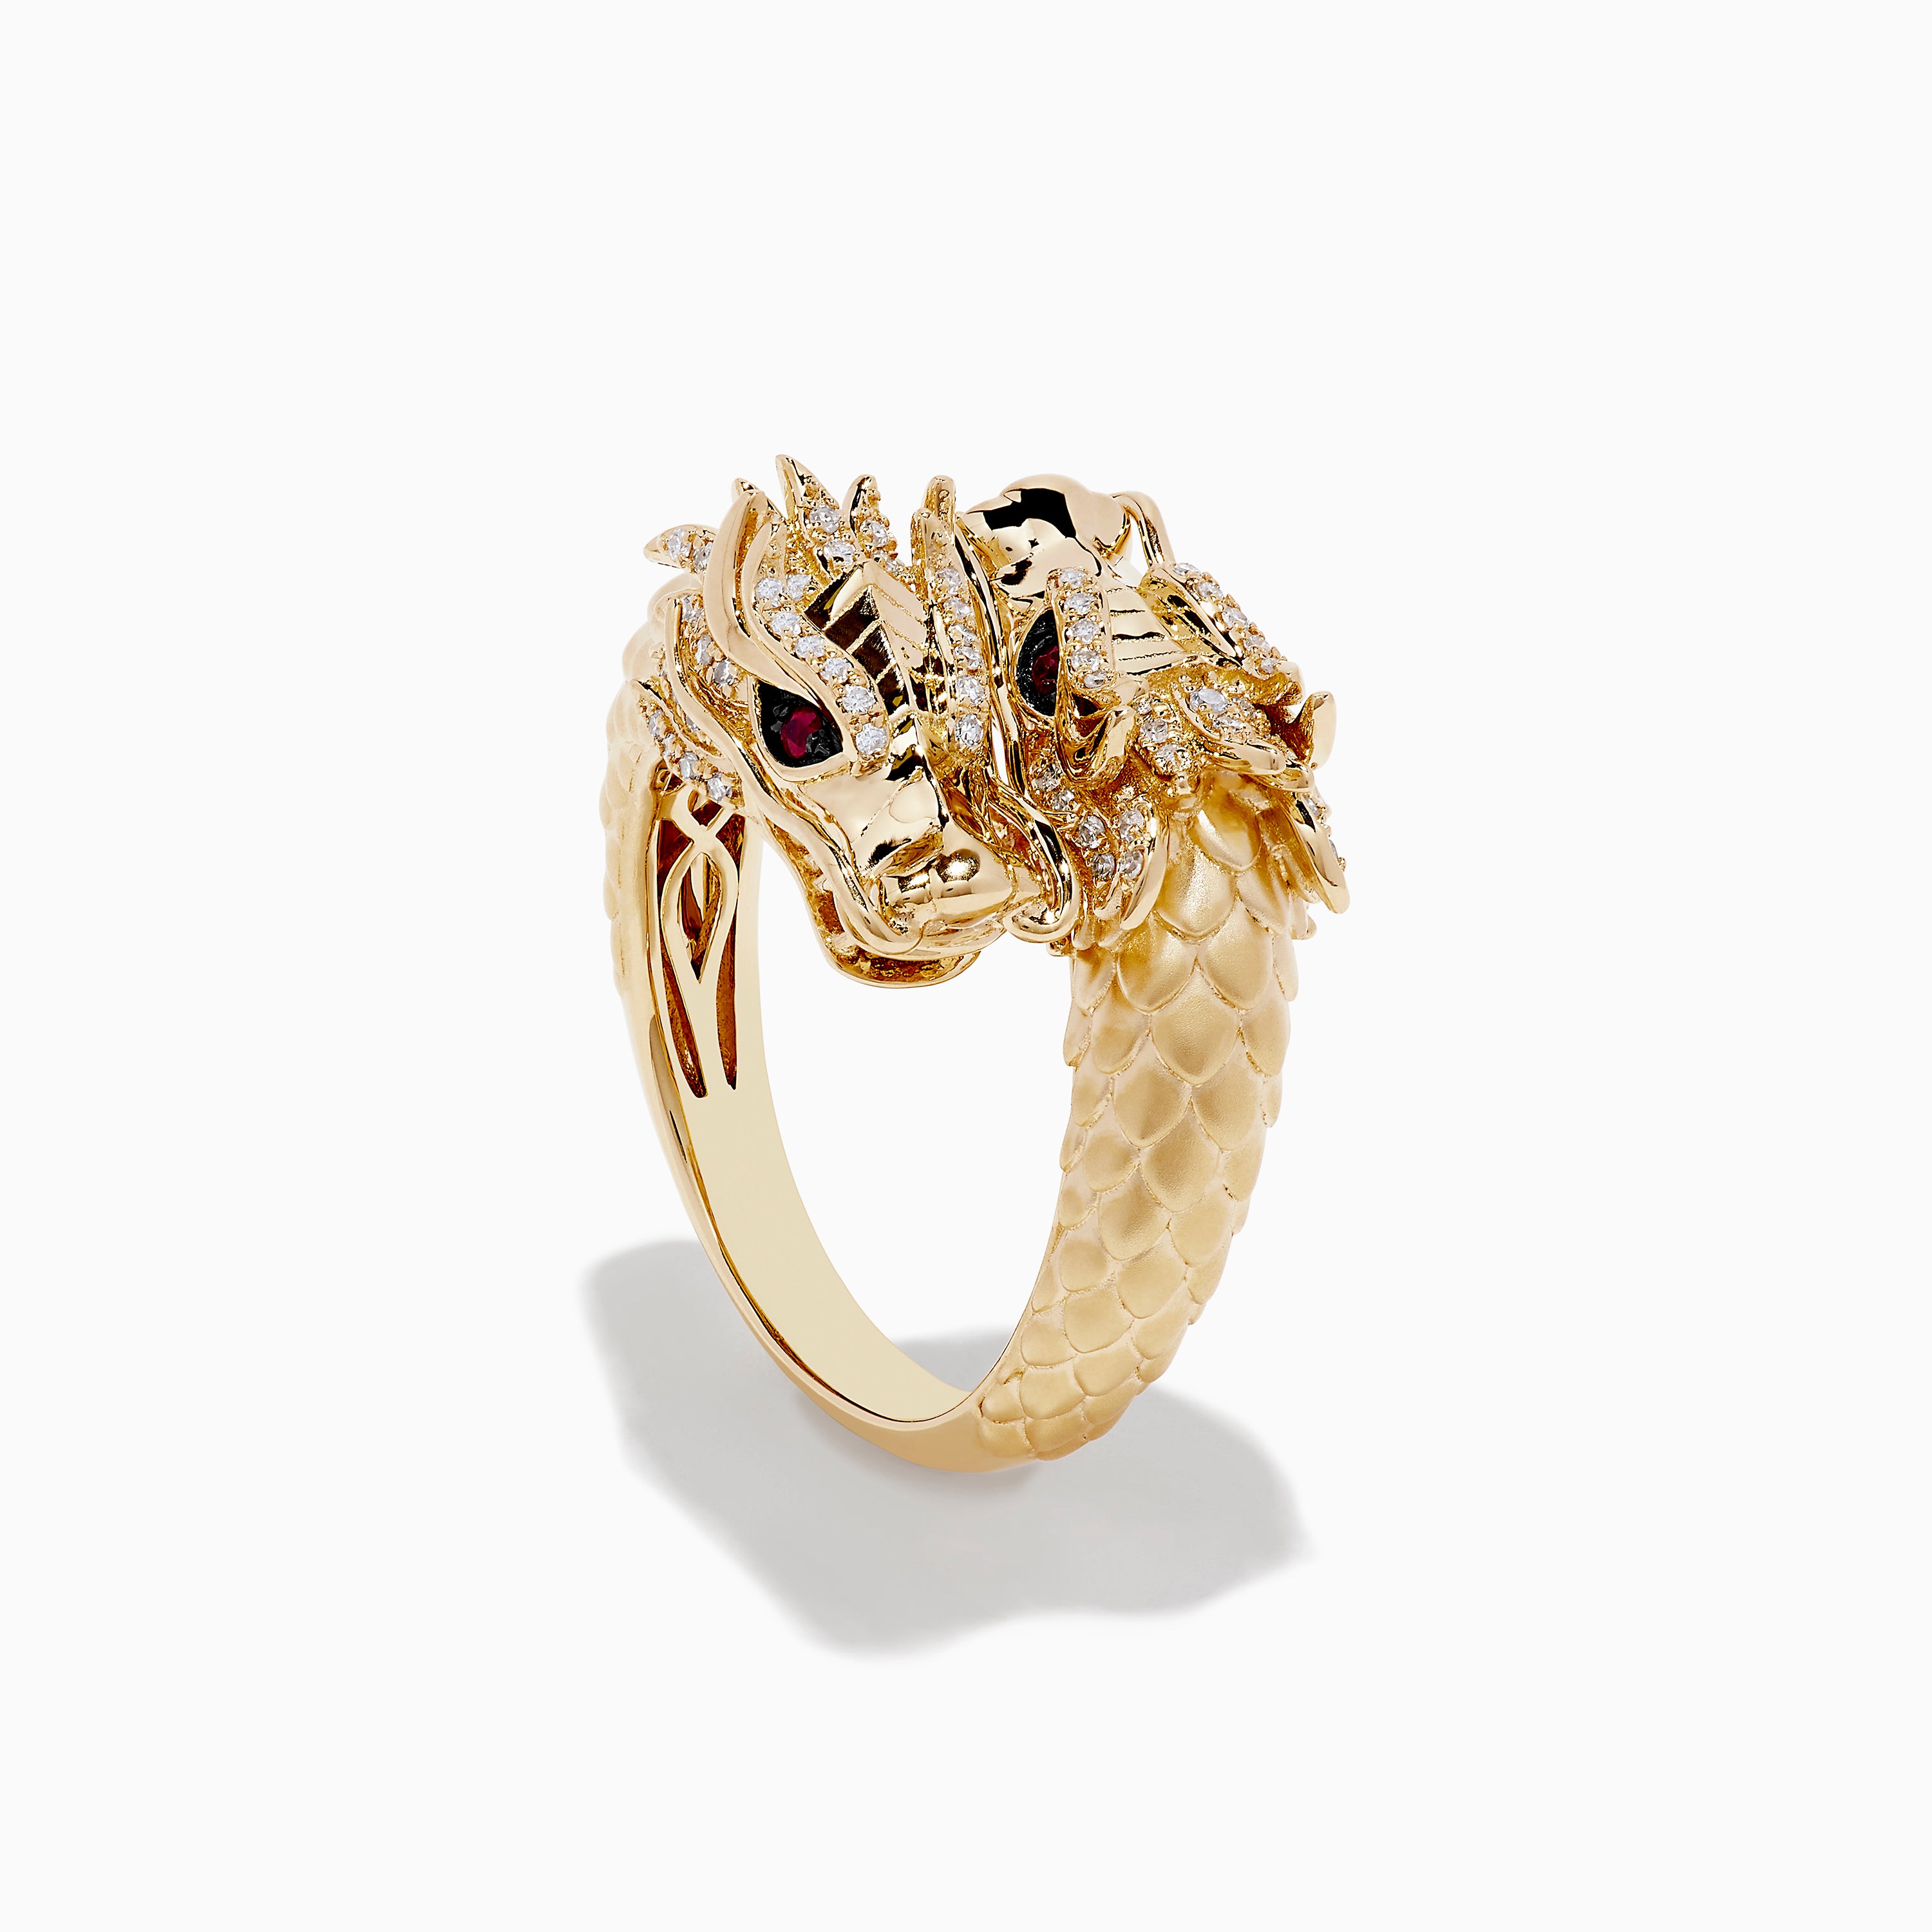 GUCCI Flora Large Diamond Floral Ring in 18k Yellow Gold